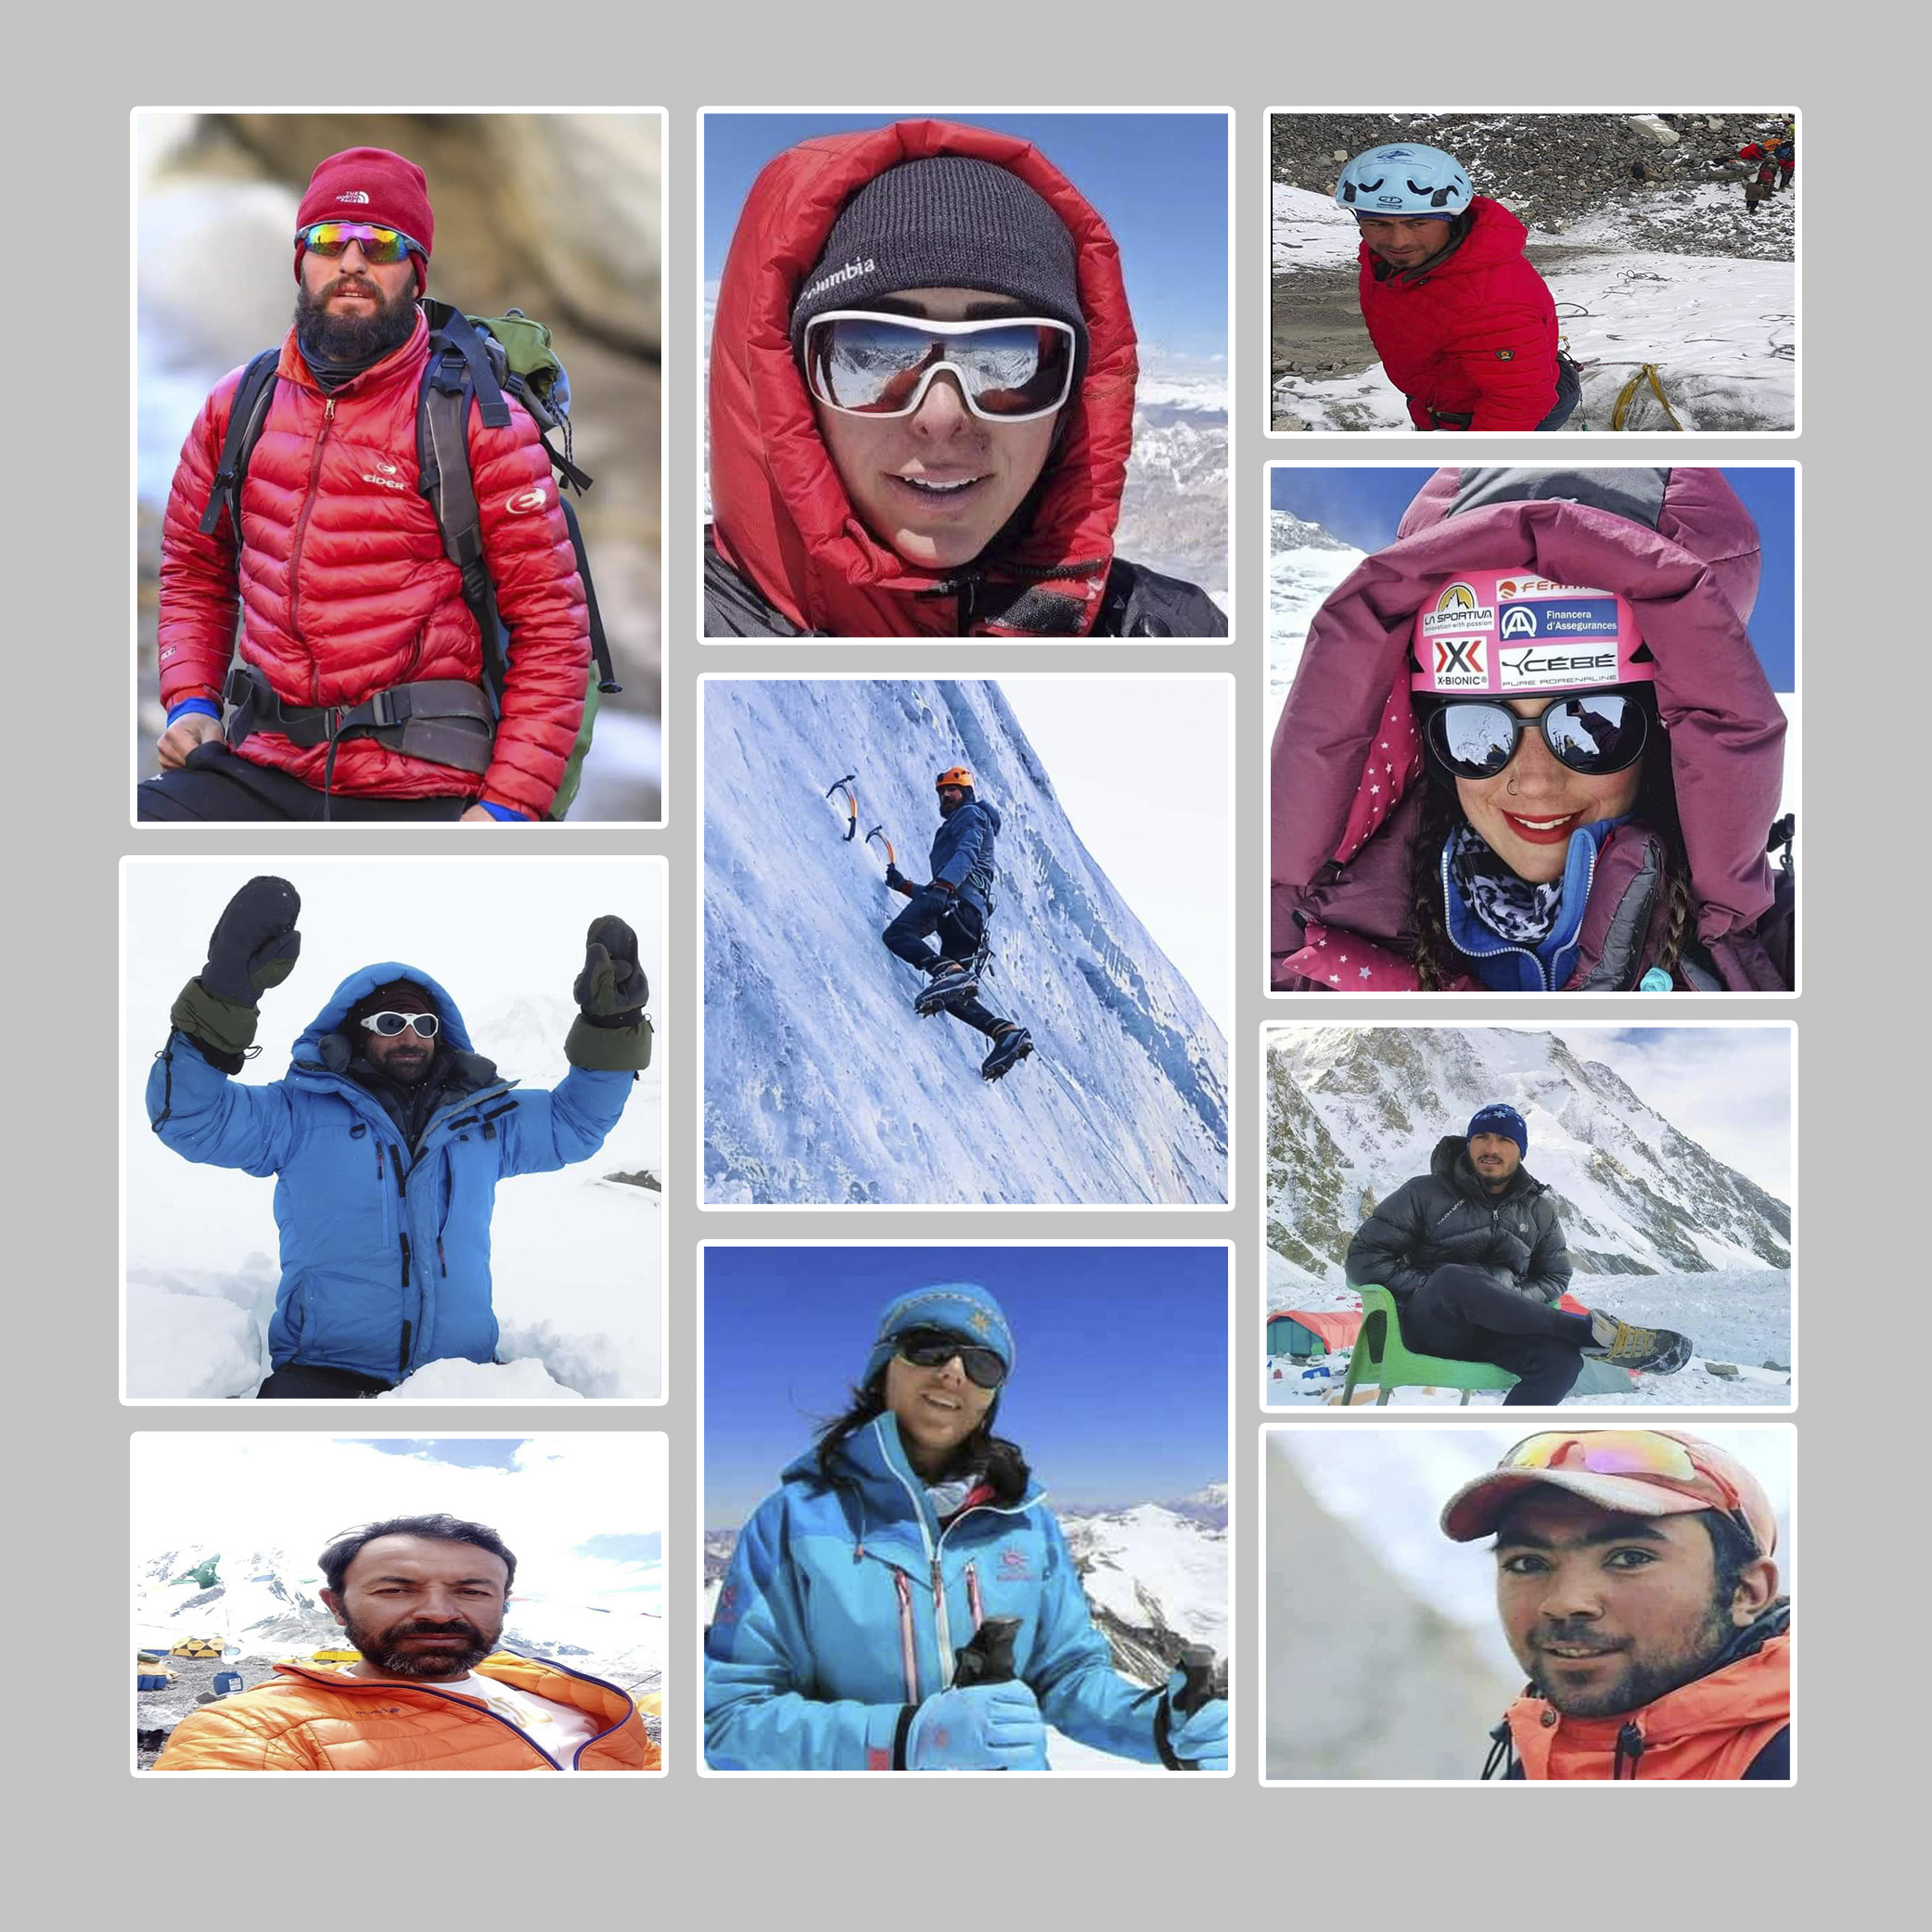 K-2 Summits on July 22nd – An Historic Day